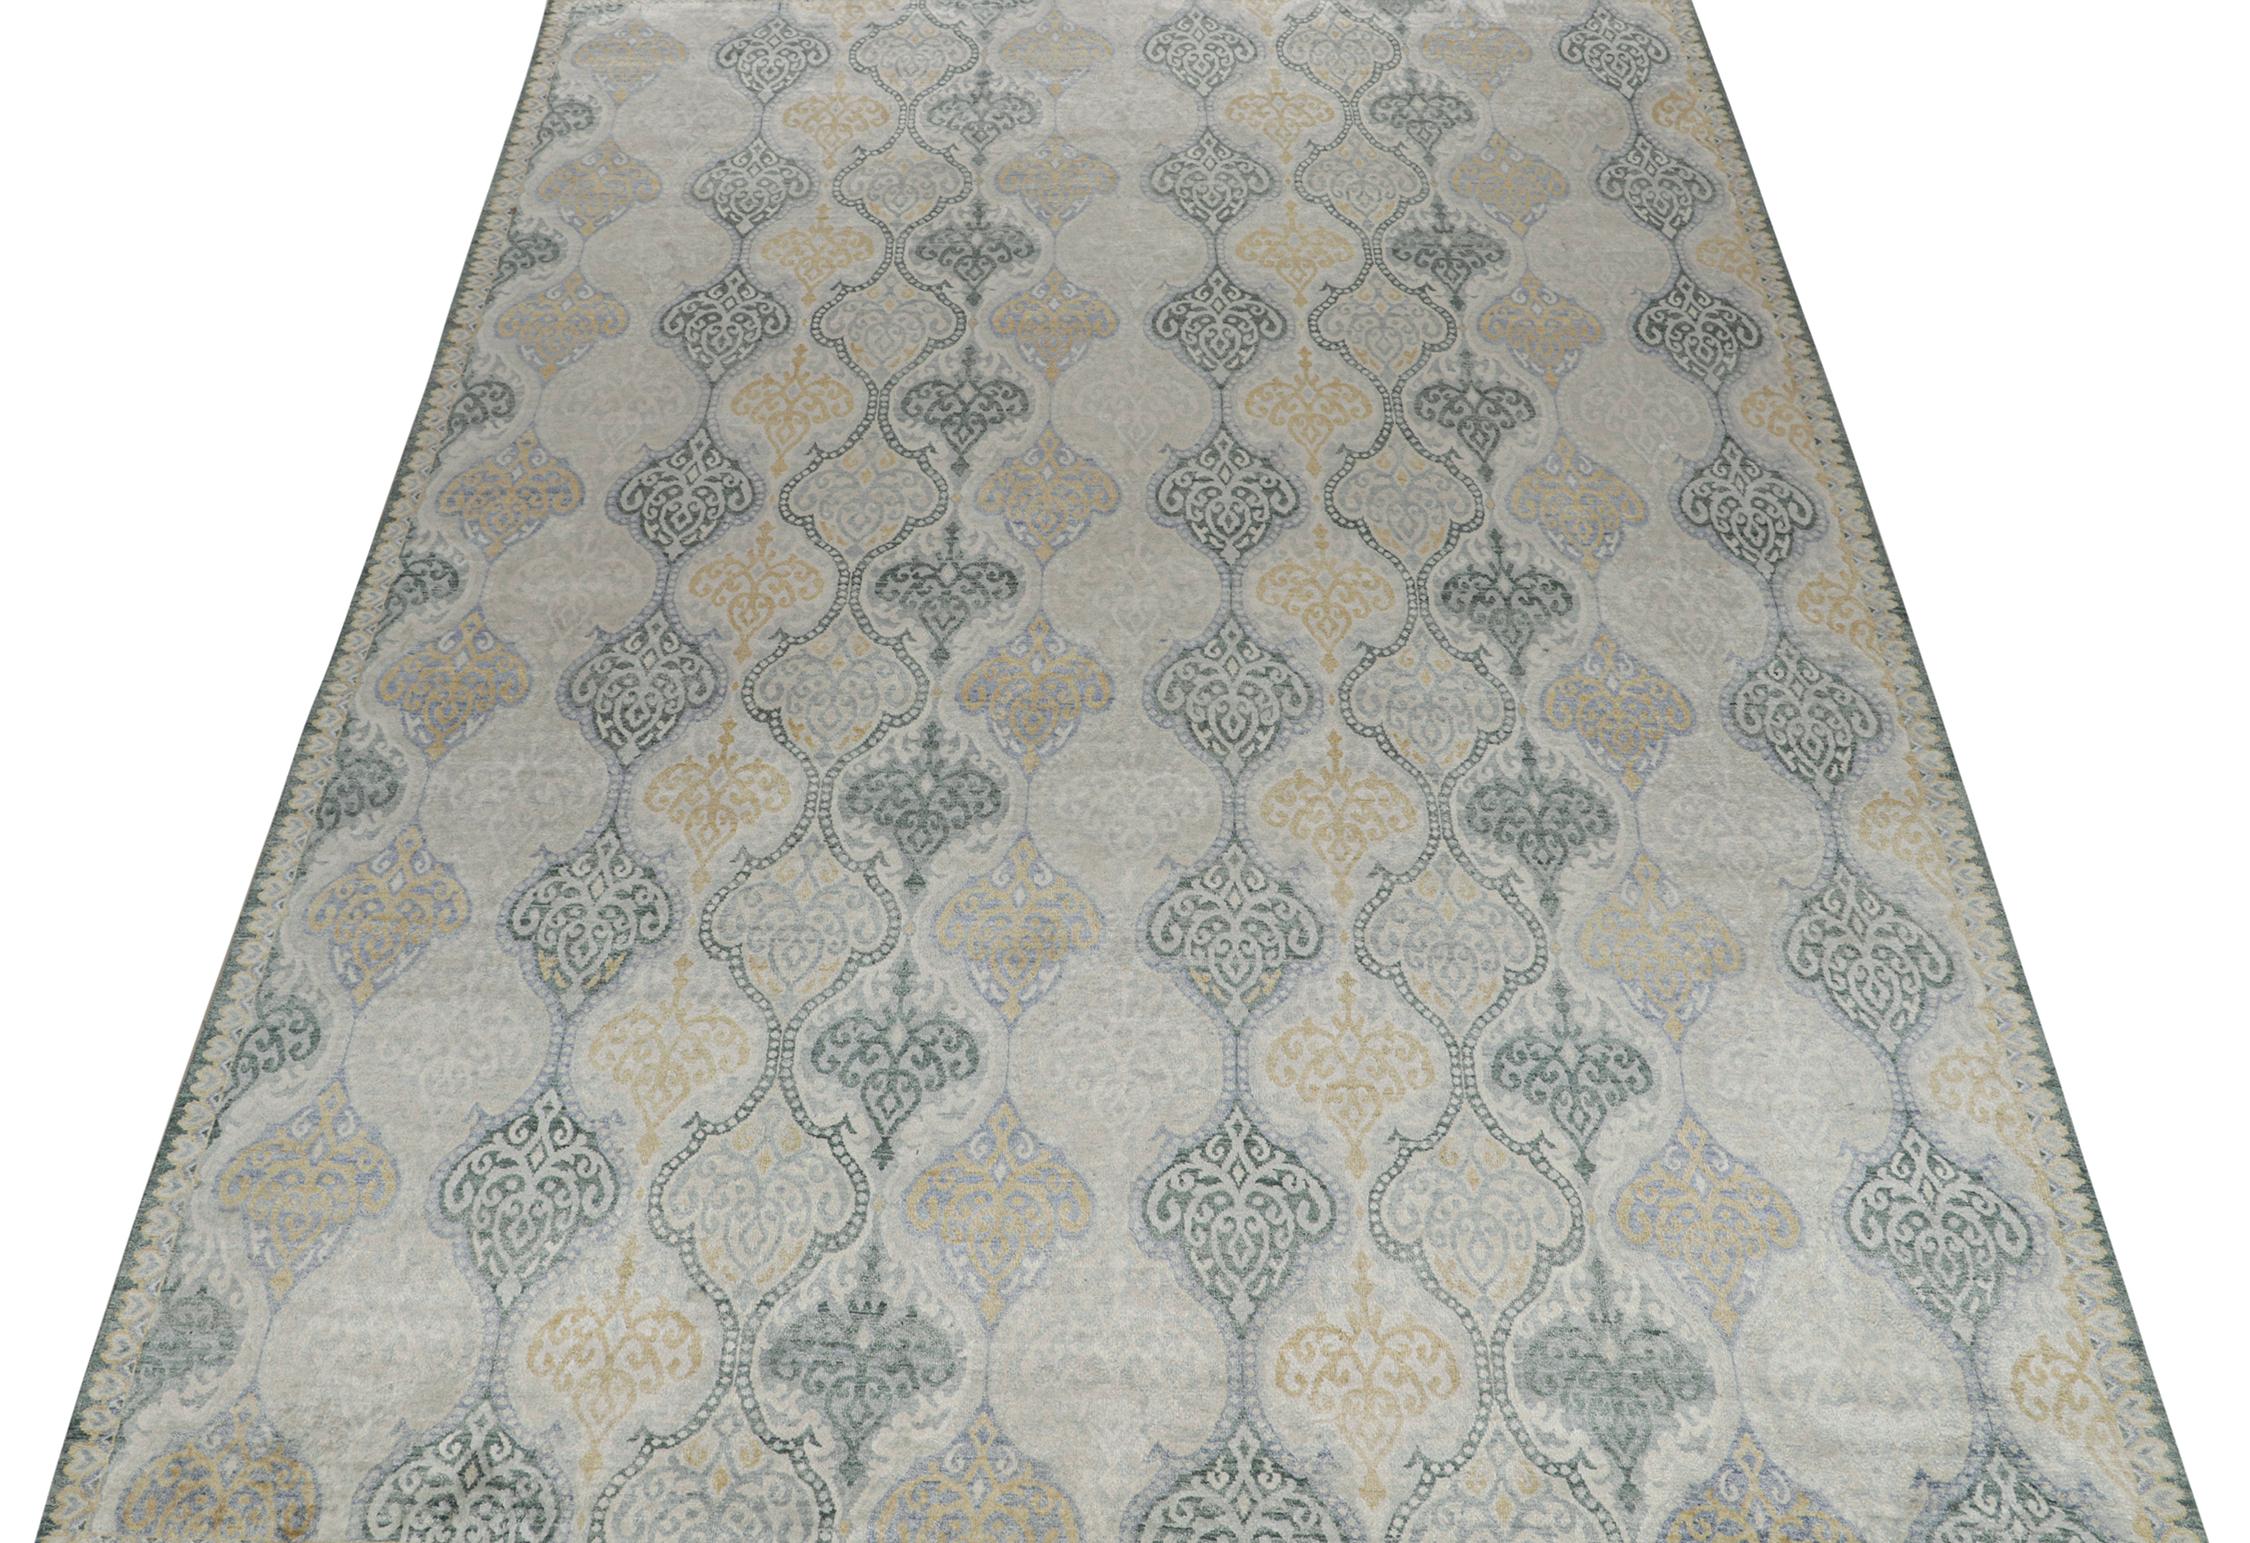 A 9x12 rug inspired from traditional rug styles, from Rug & Kilim’s Modern Classics Collection. Hand-knotted in wool, playing a confluence of gray, beige, blue and gold floral patterns with classic grace.
Further on the design:
Keen eyes will admire